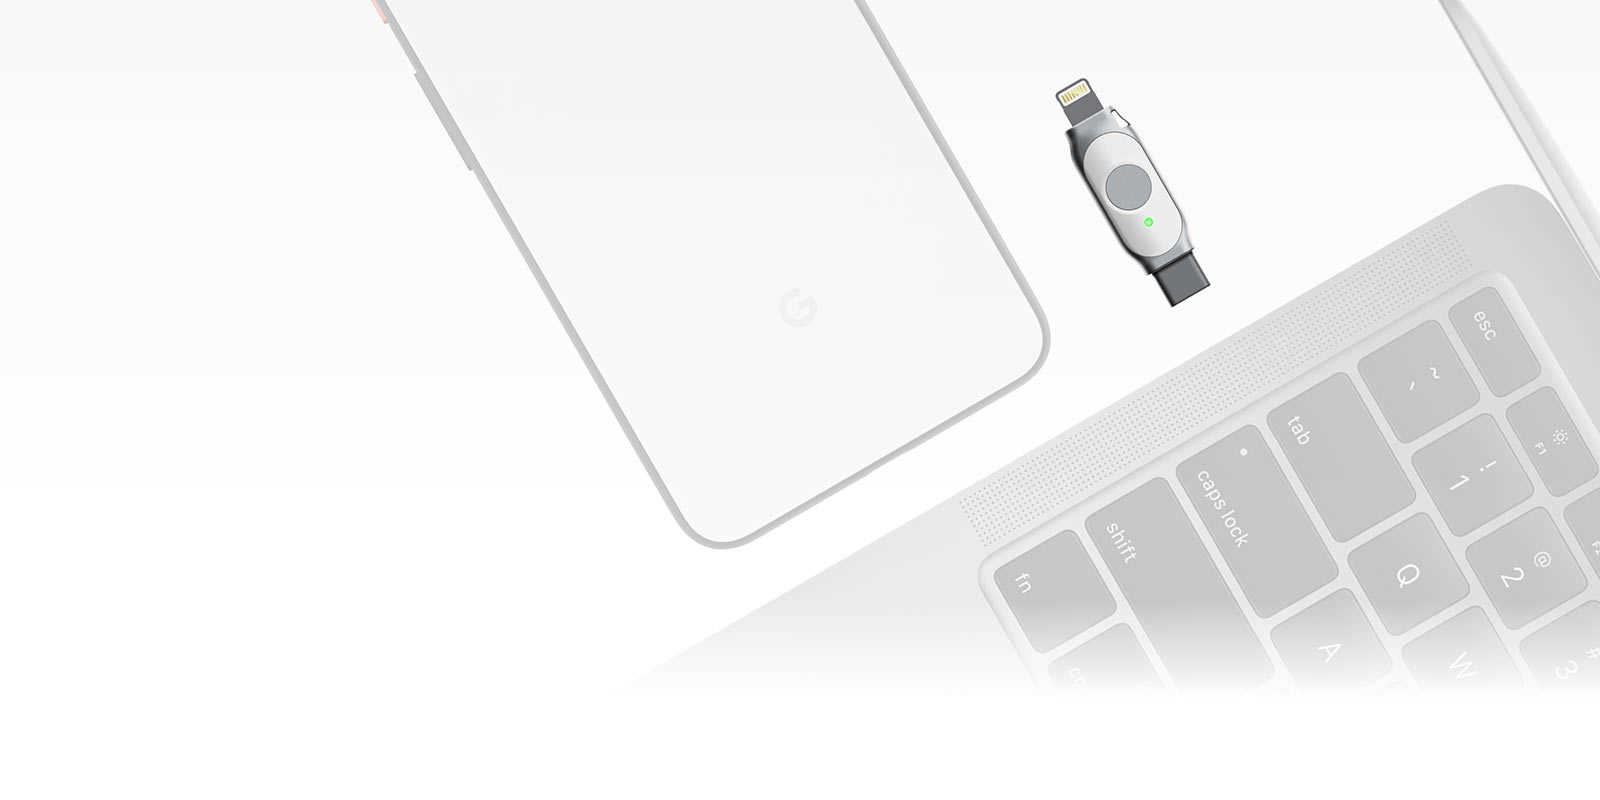 iePass FIDO USB Type-C connector for PCs and Android devices